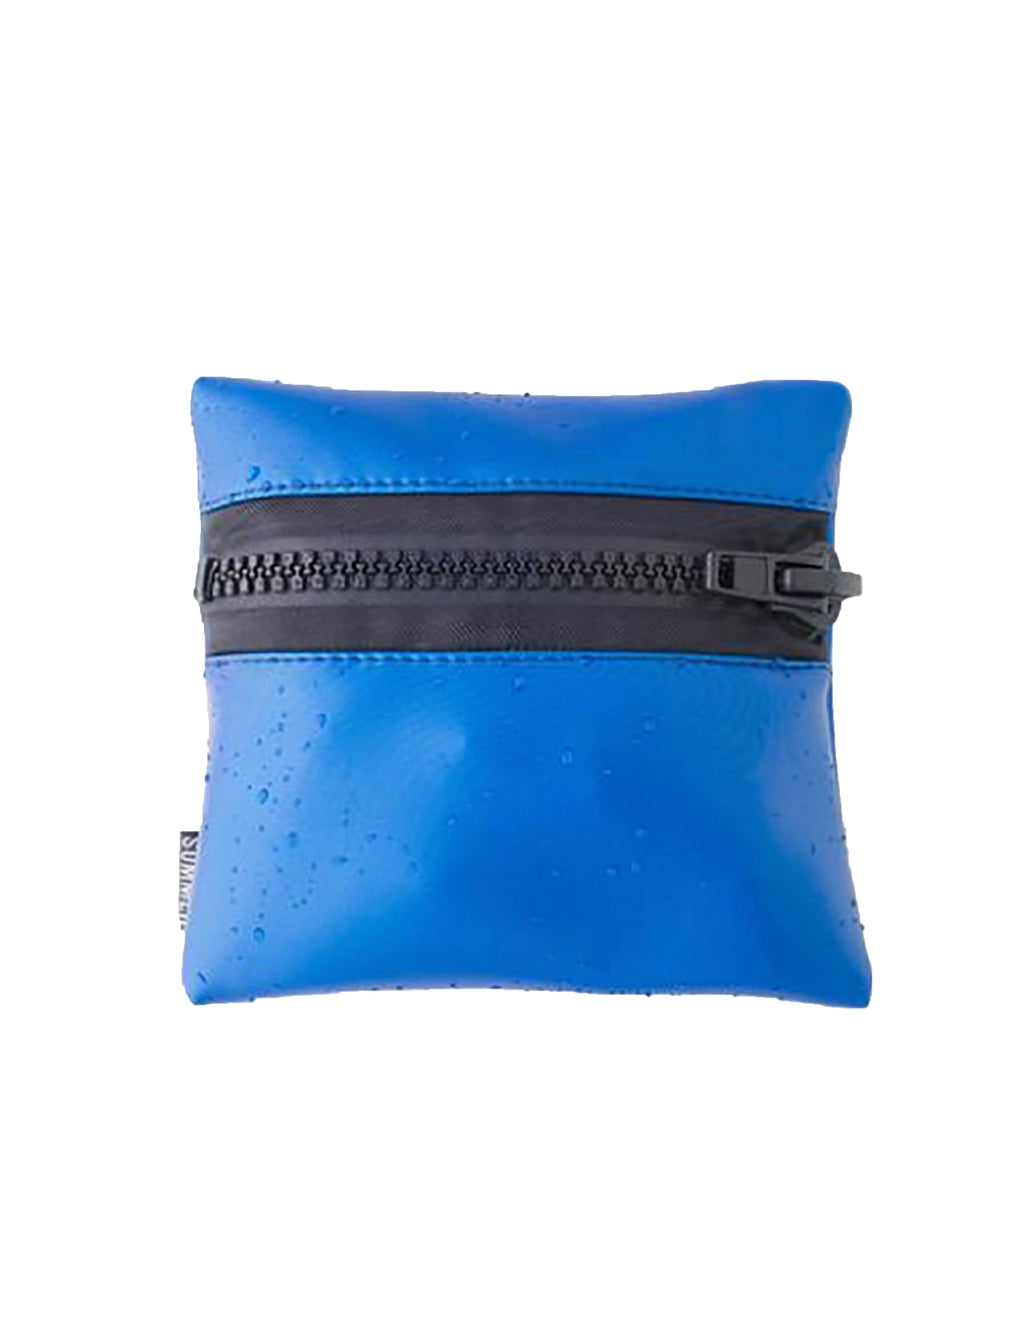 SUMMER BUMMER + SOFTWARE PROTECTIVE CLOTHING WATER BED BLUE ZIP POUCH